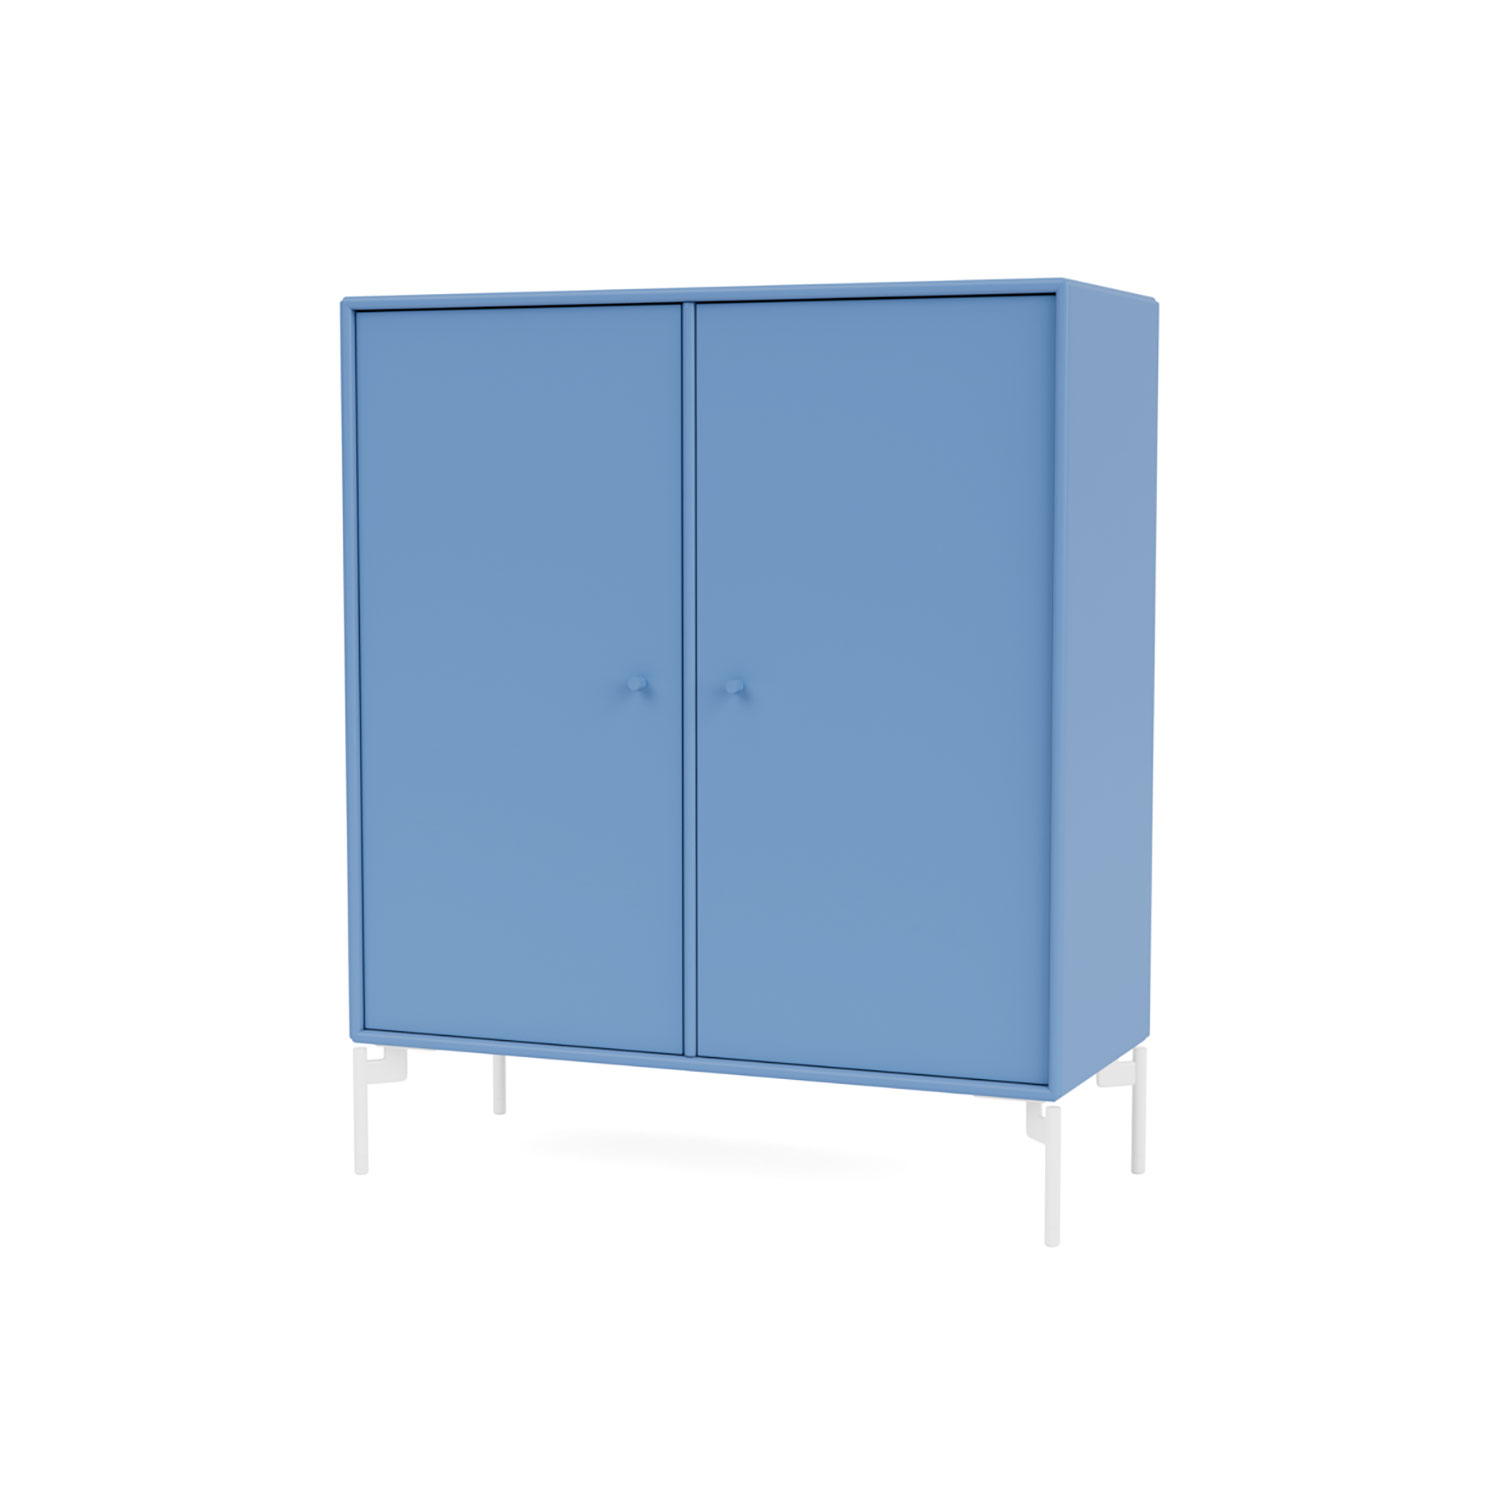 COVER Cabinet 1118, Azure